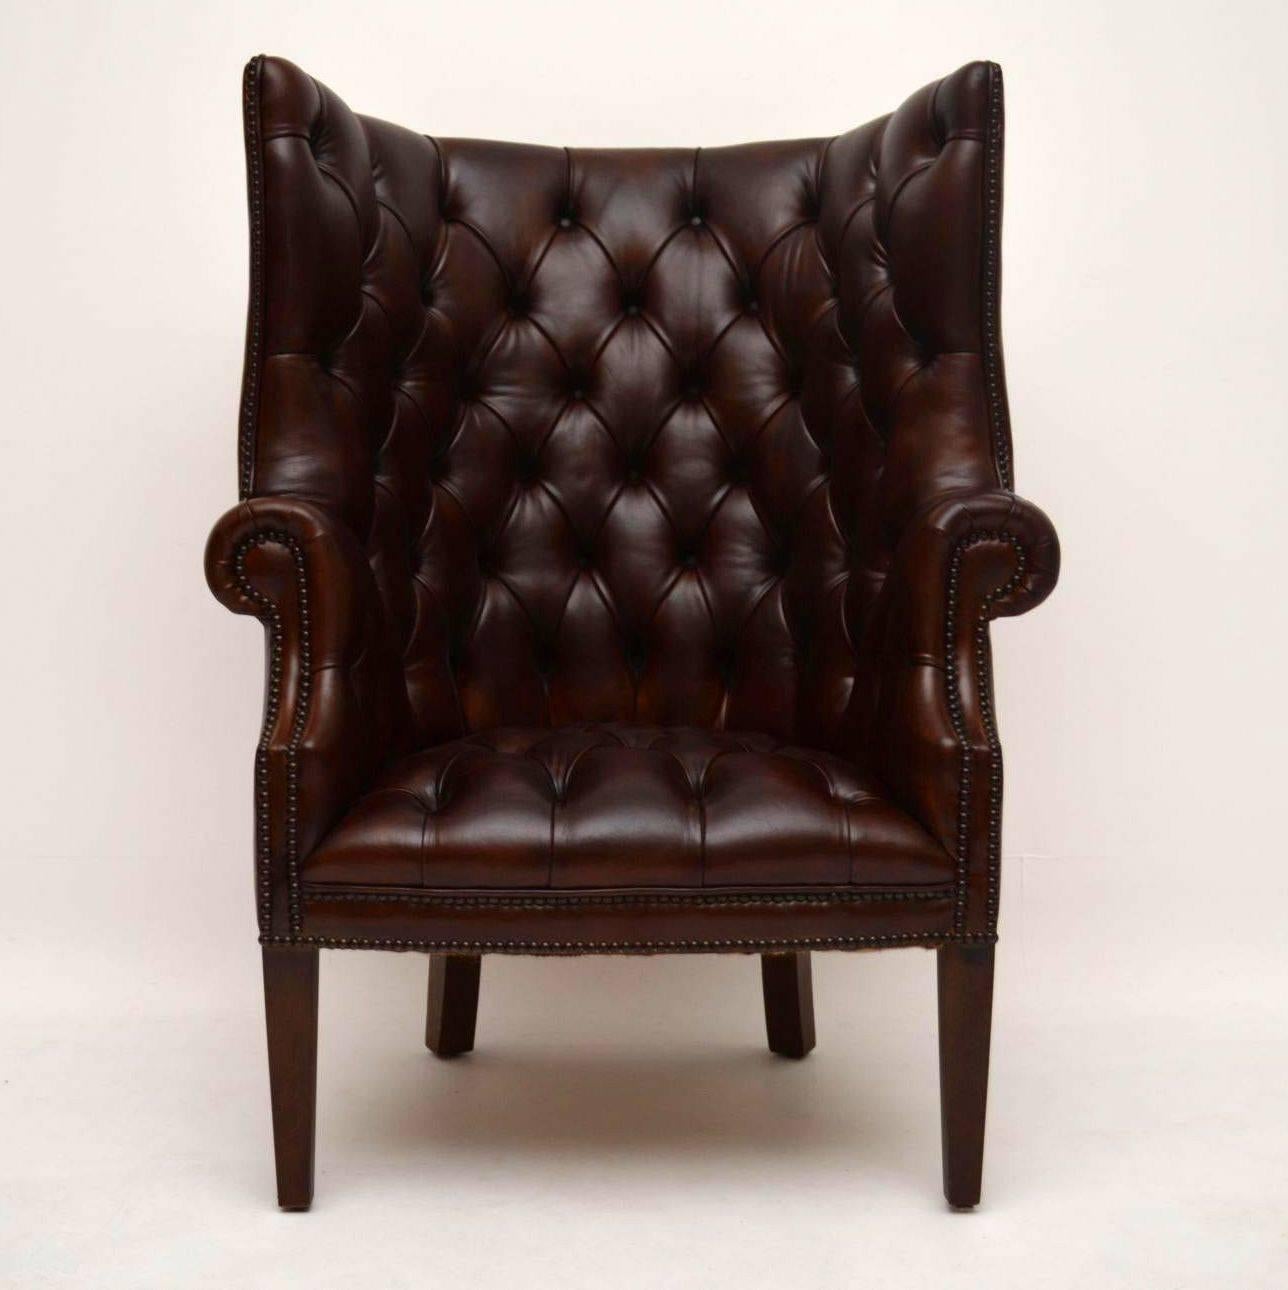 English Pair of Antique Leather Porters Wing Armchairs